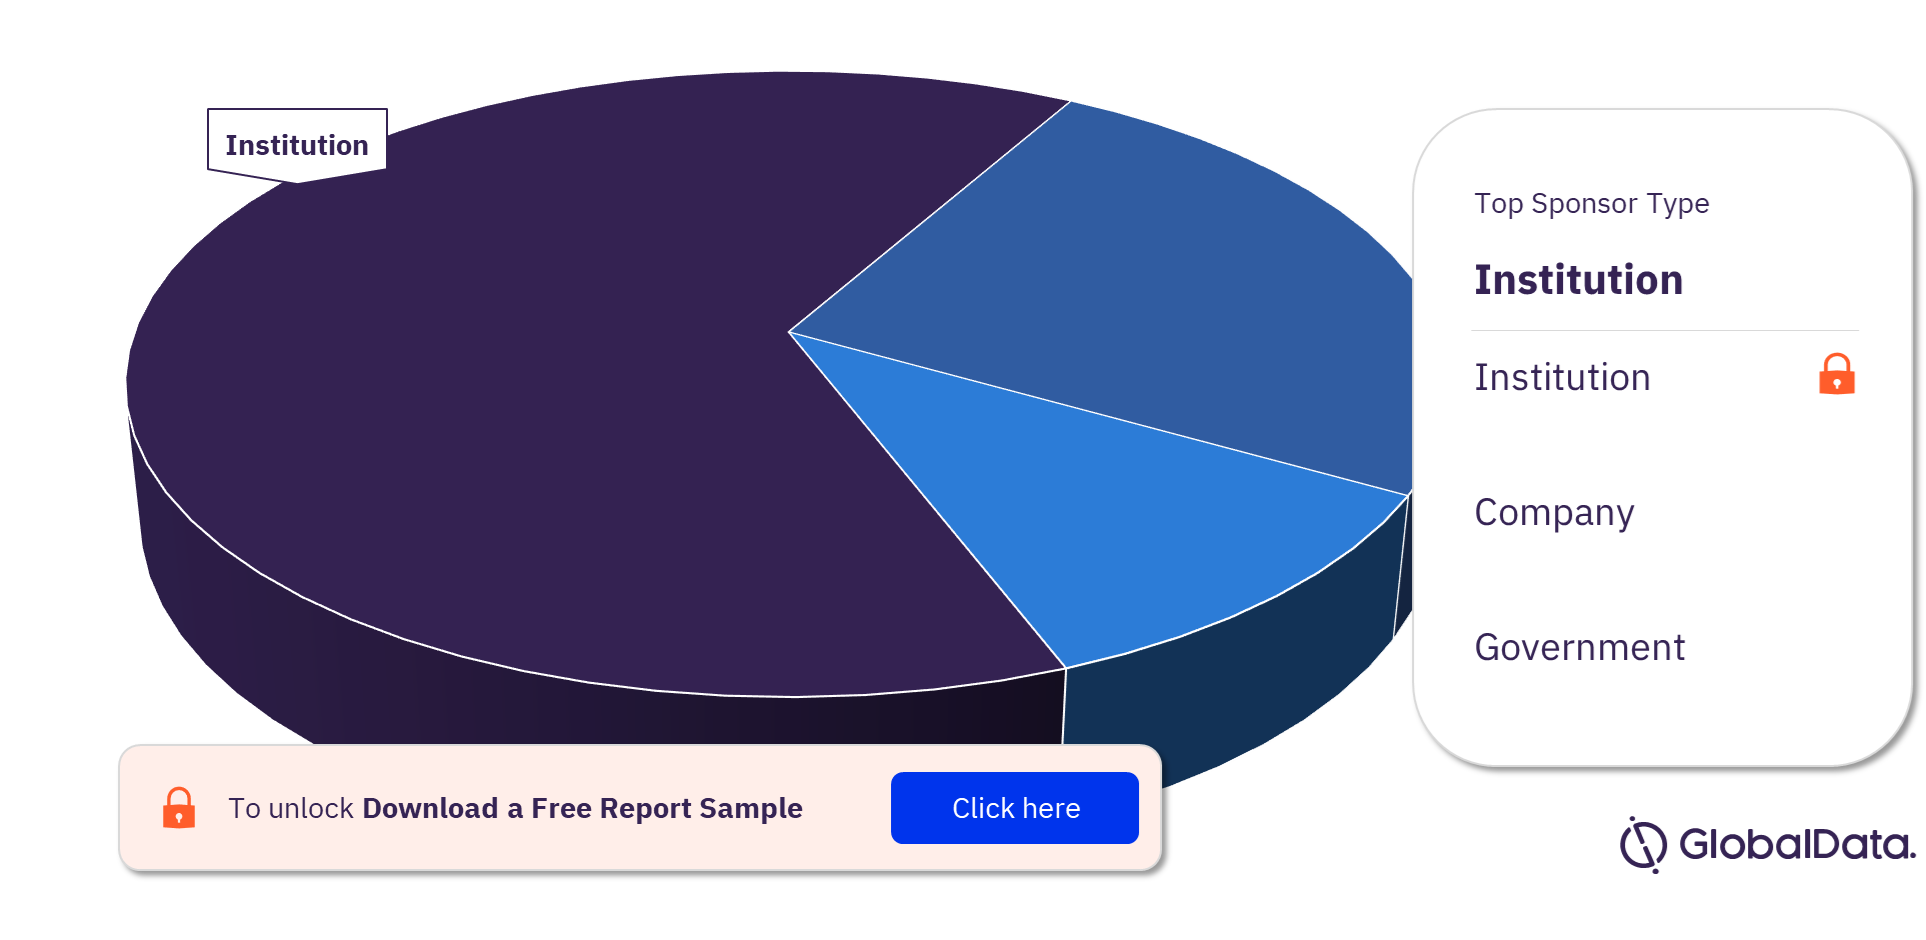 Mycosis Fungoides Clinical Trials Market Analysis by Sponsor Types, 2023 (%)